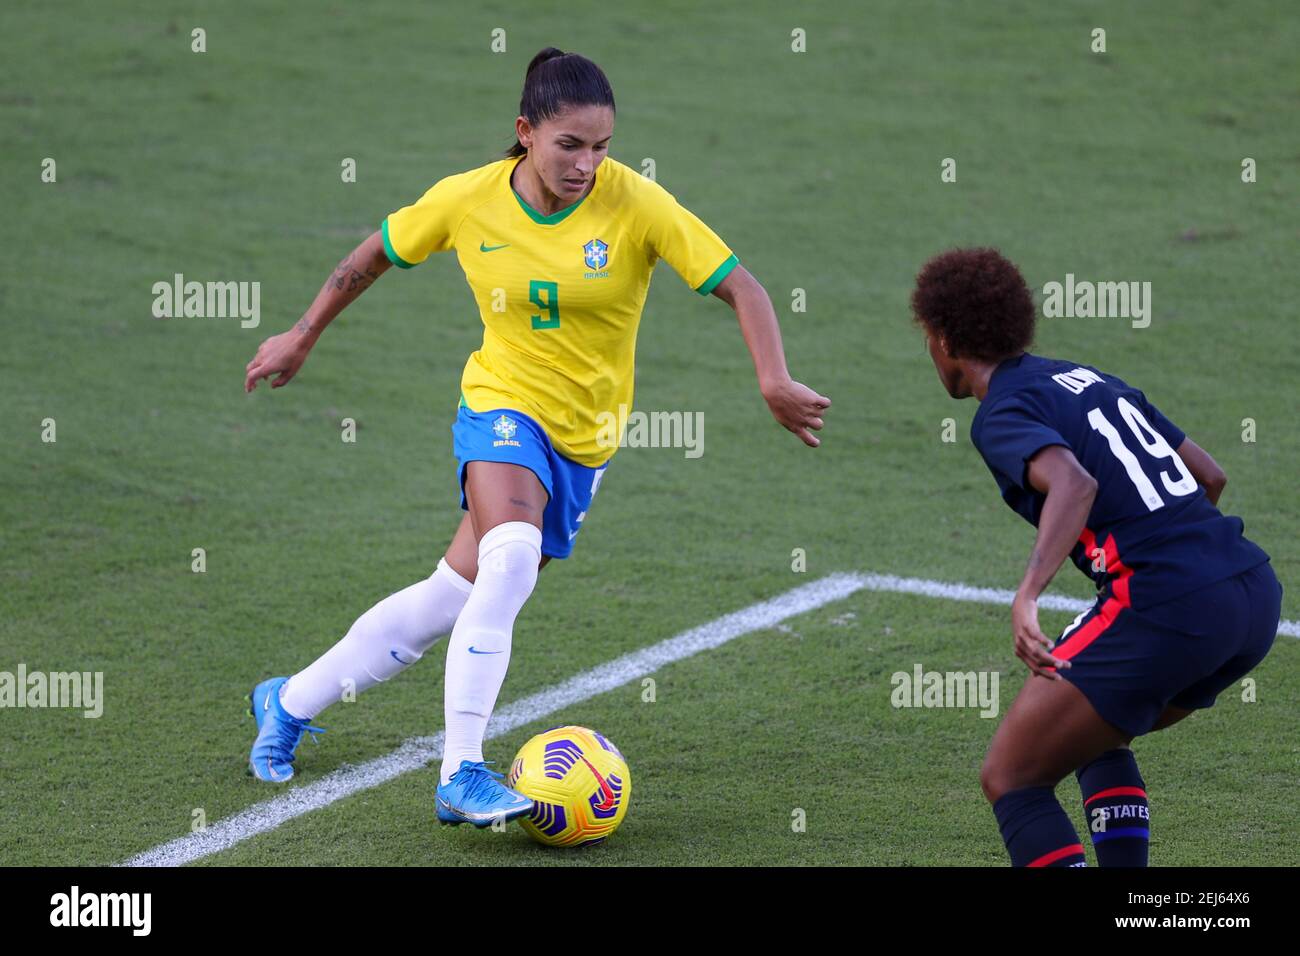 Orlando, Florida, USA . February 21, 2021: Brazil forward DEBINHA (9) competes for the ball against United States defender CRYSTAL DUNN (19) during the SheBelieves Cup United States vs Brazil match at Exploria Stadium in Orlando, Fl on February 21, 2021. Credit: Cory Knowlton/ZUMA Wire/Alamy Live News Stock Photo